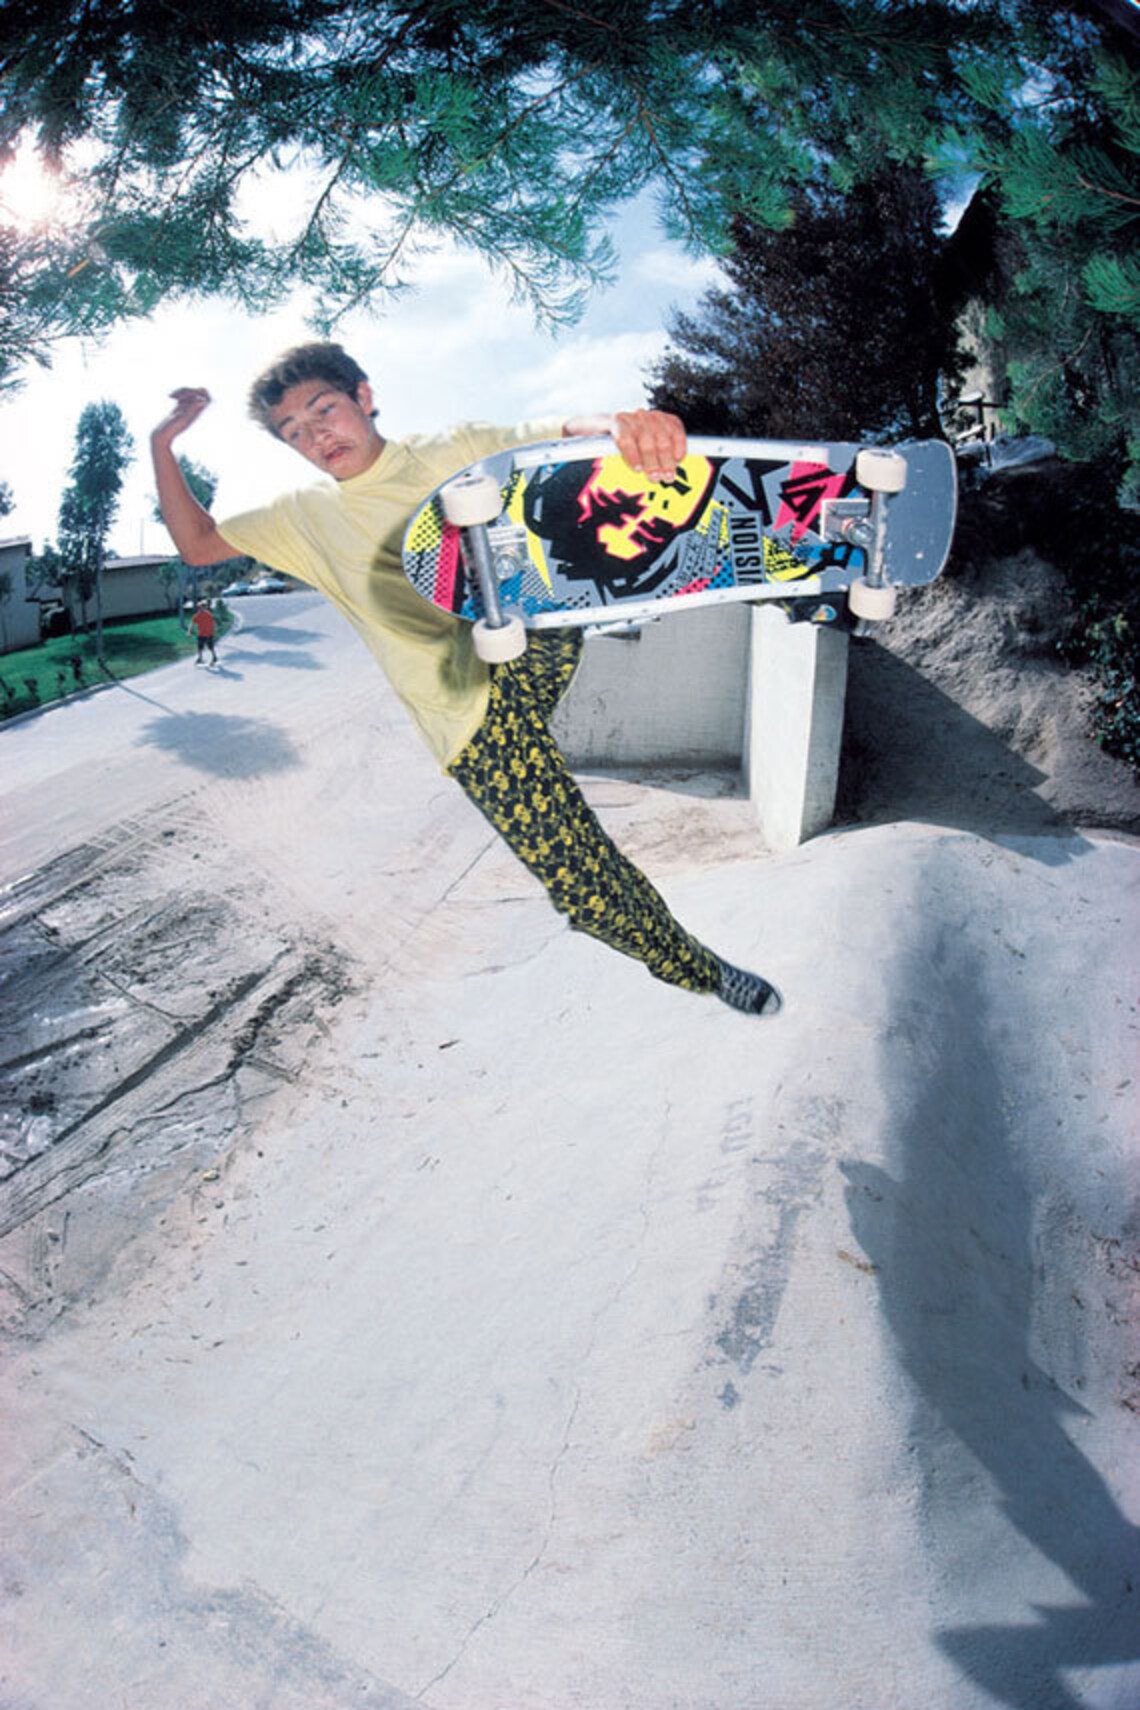 About Mark Gonzales - Pro Skateboarder Profile, Biography and History